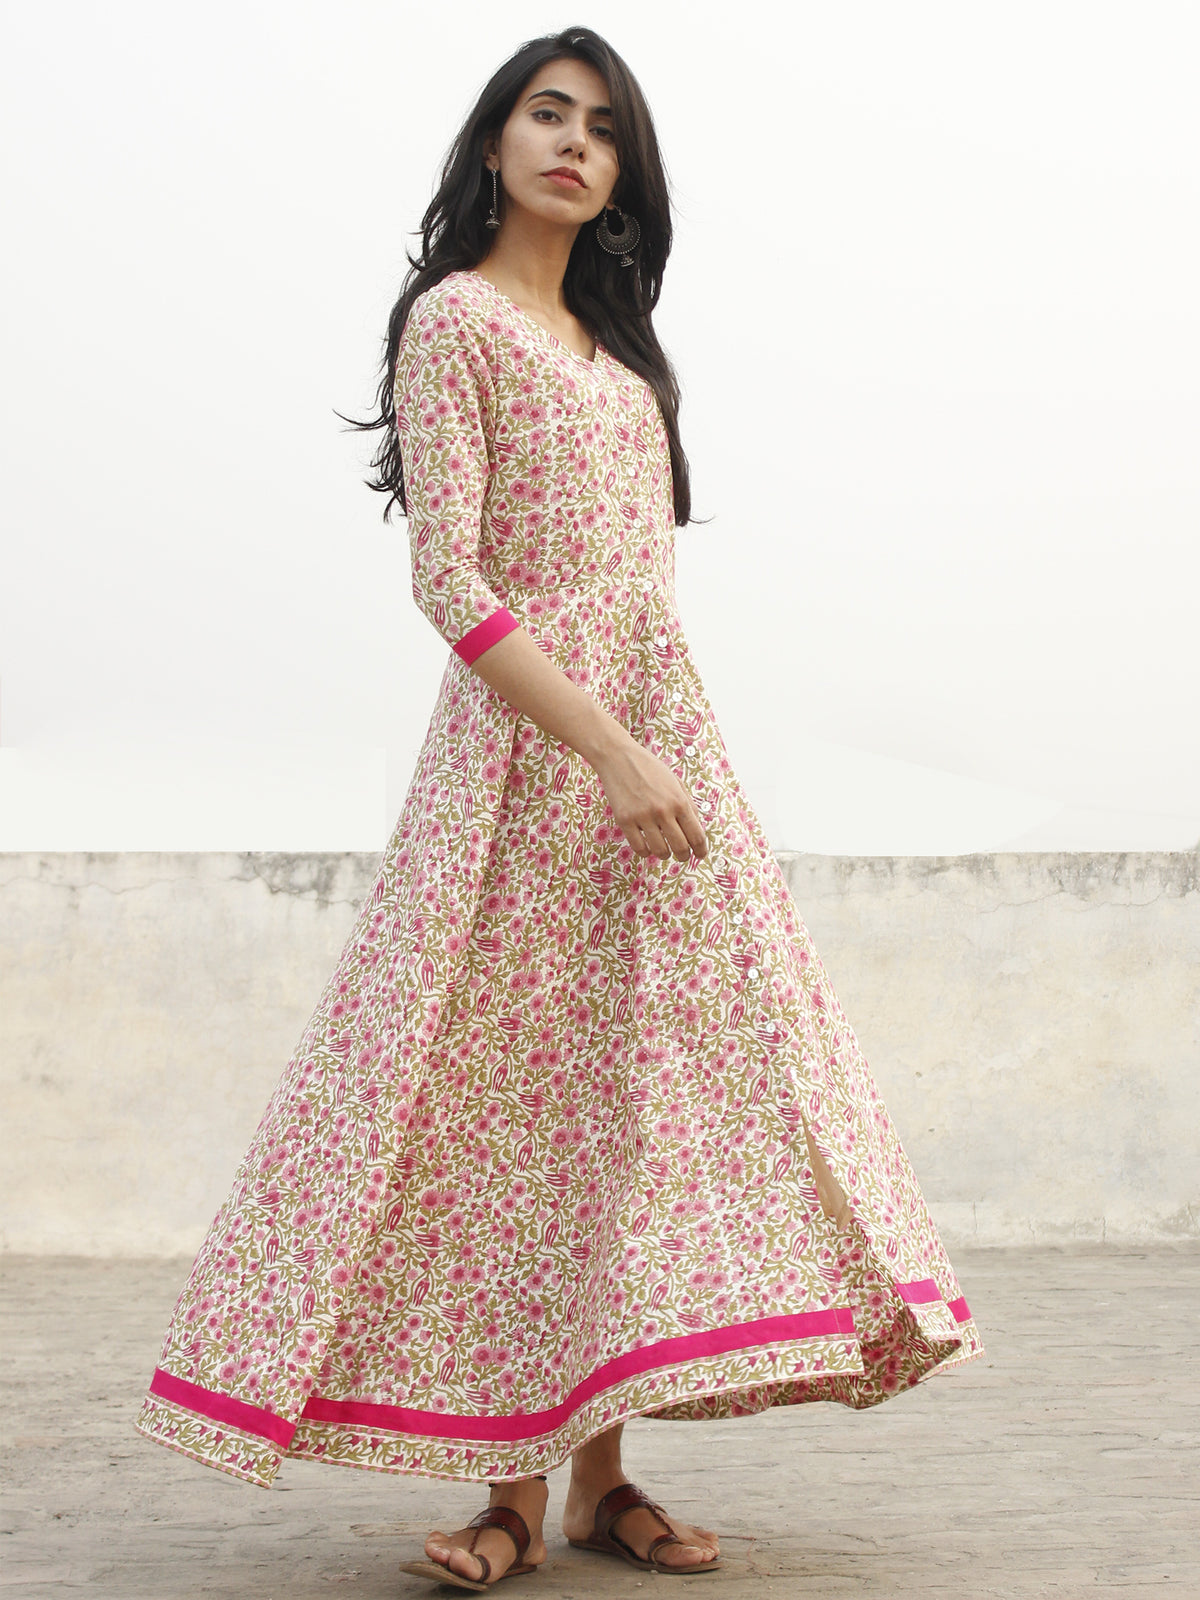 Ivory Pink Green Magenta Long Front Open Hand Block Cotton Dress With Lining   - D149F1099